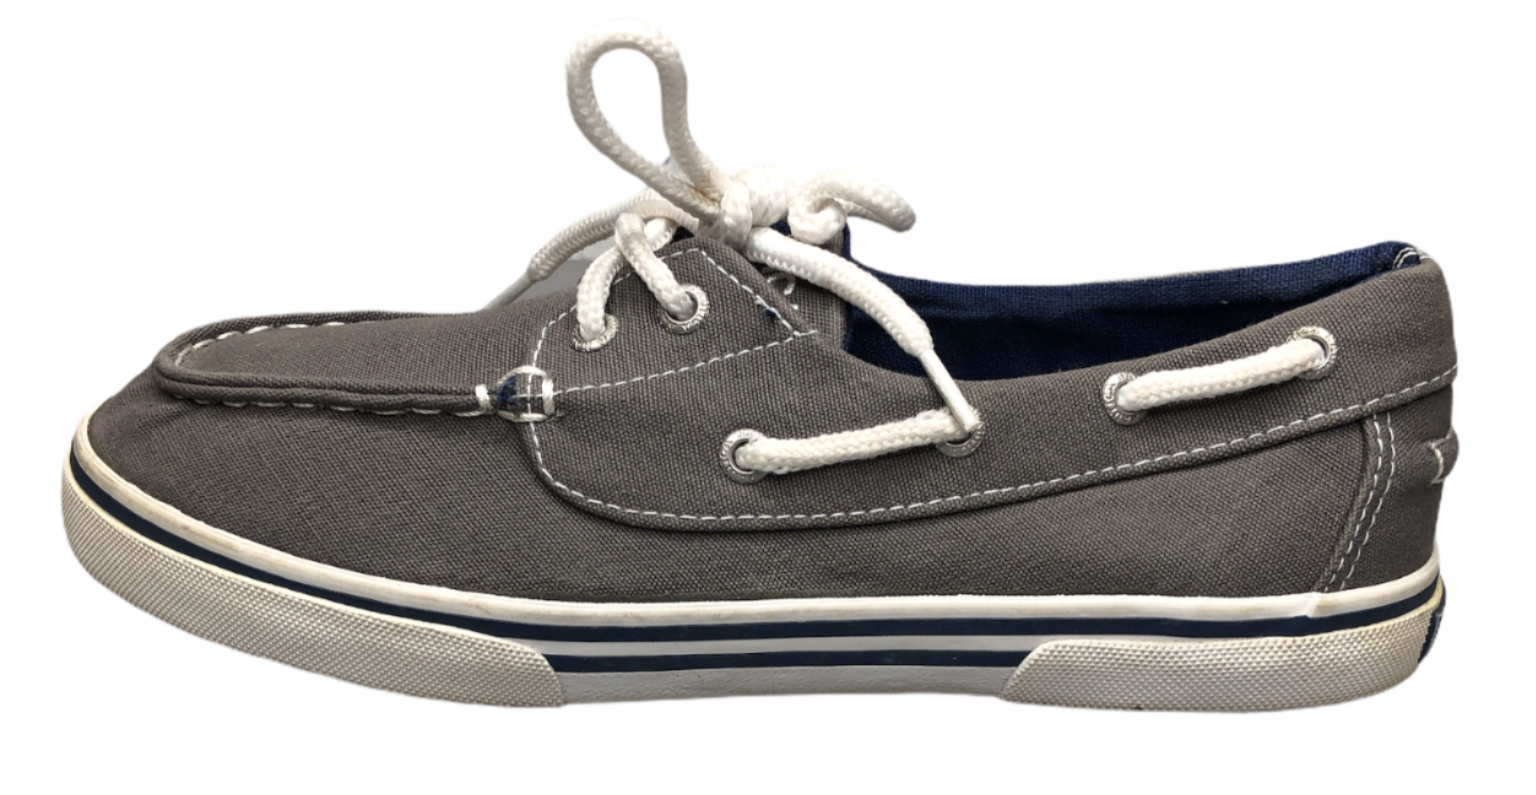 Nautica Boat Shoes Canvas Youth Size 4 Gray White Boys Flats Spinnaker Pintucked - $31.98